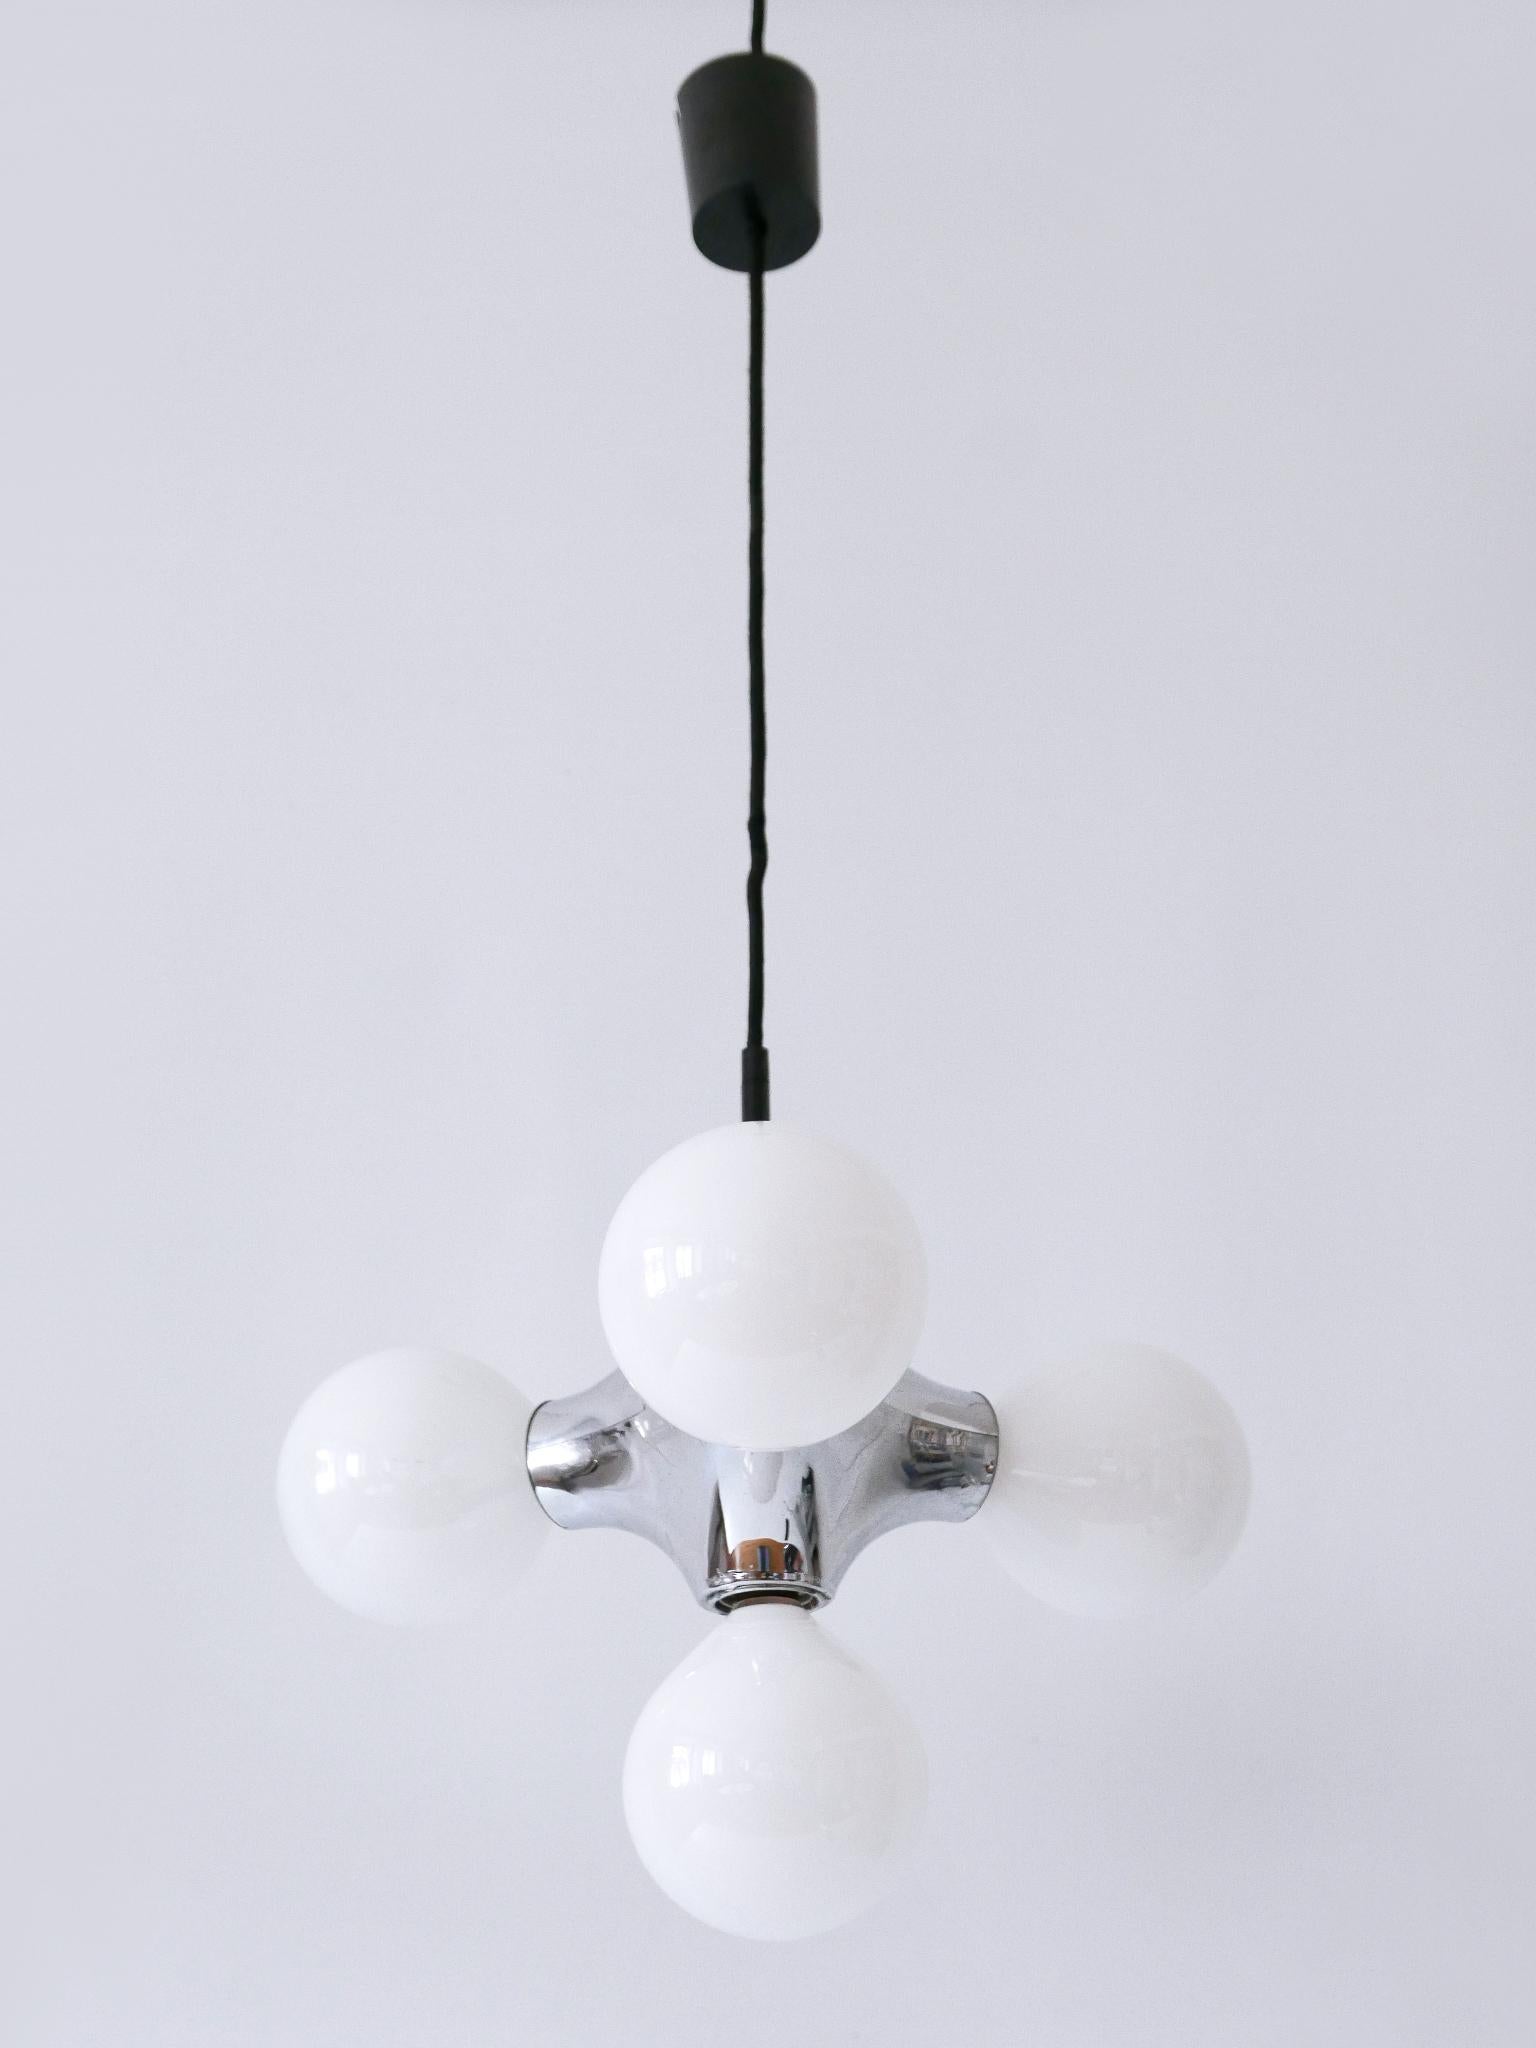 Rare Mid-Century Modern Atomic Pendant Lamp by Gebrüder Cosack Germany 1970s For Sale 3